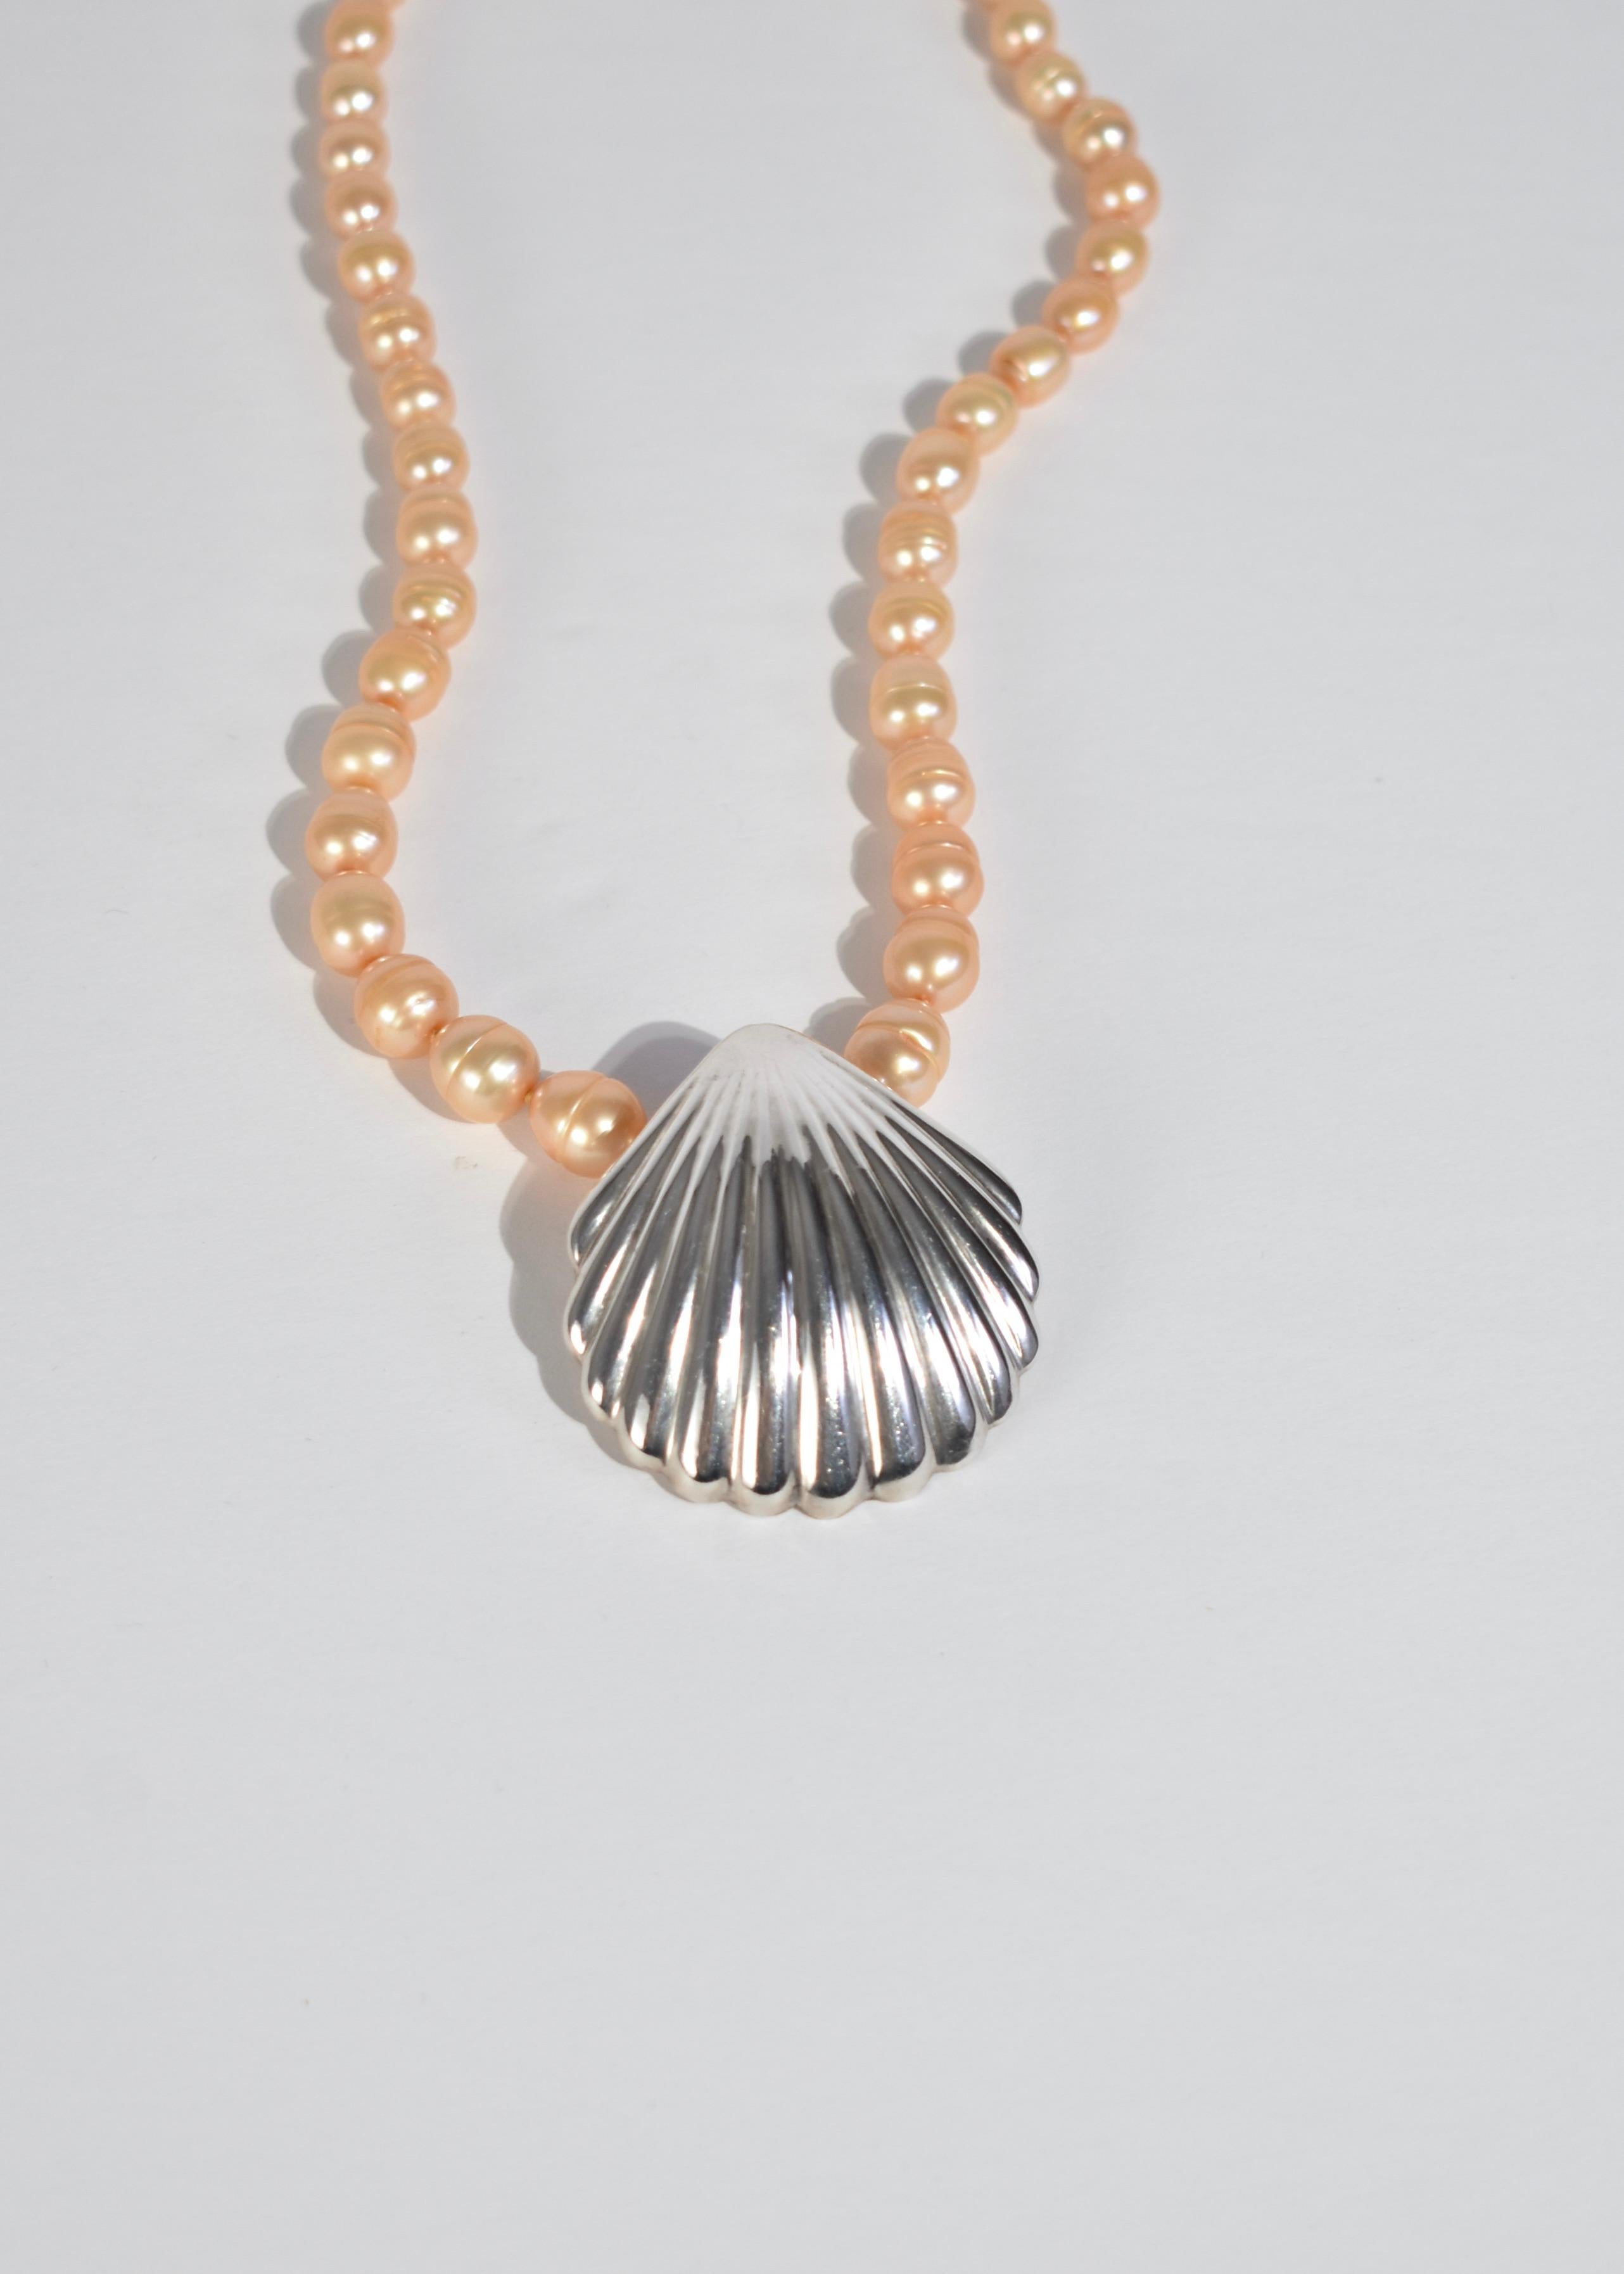 Vintage light yellow pearl necklace with oversized silver shell pendant and clasp closure. Stamped 925.

Material: Sterling silver, freshwater pearl.

